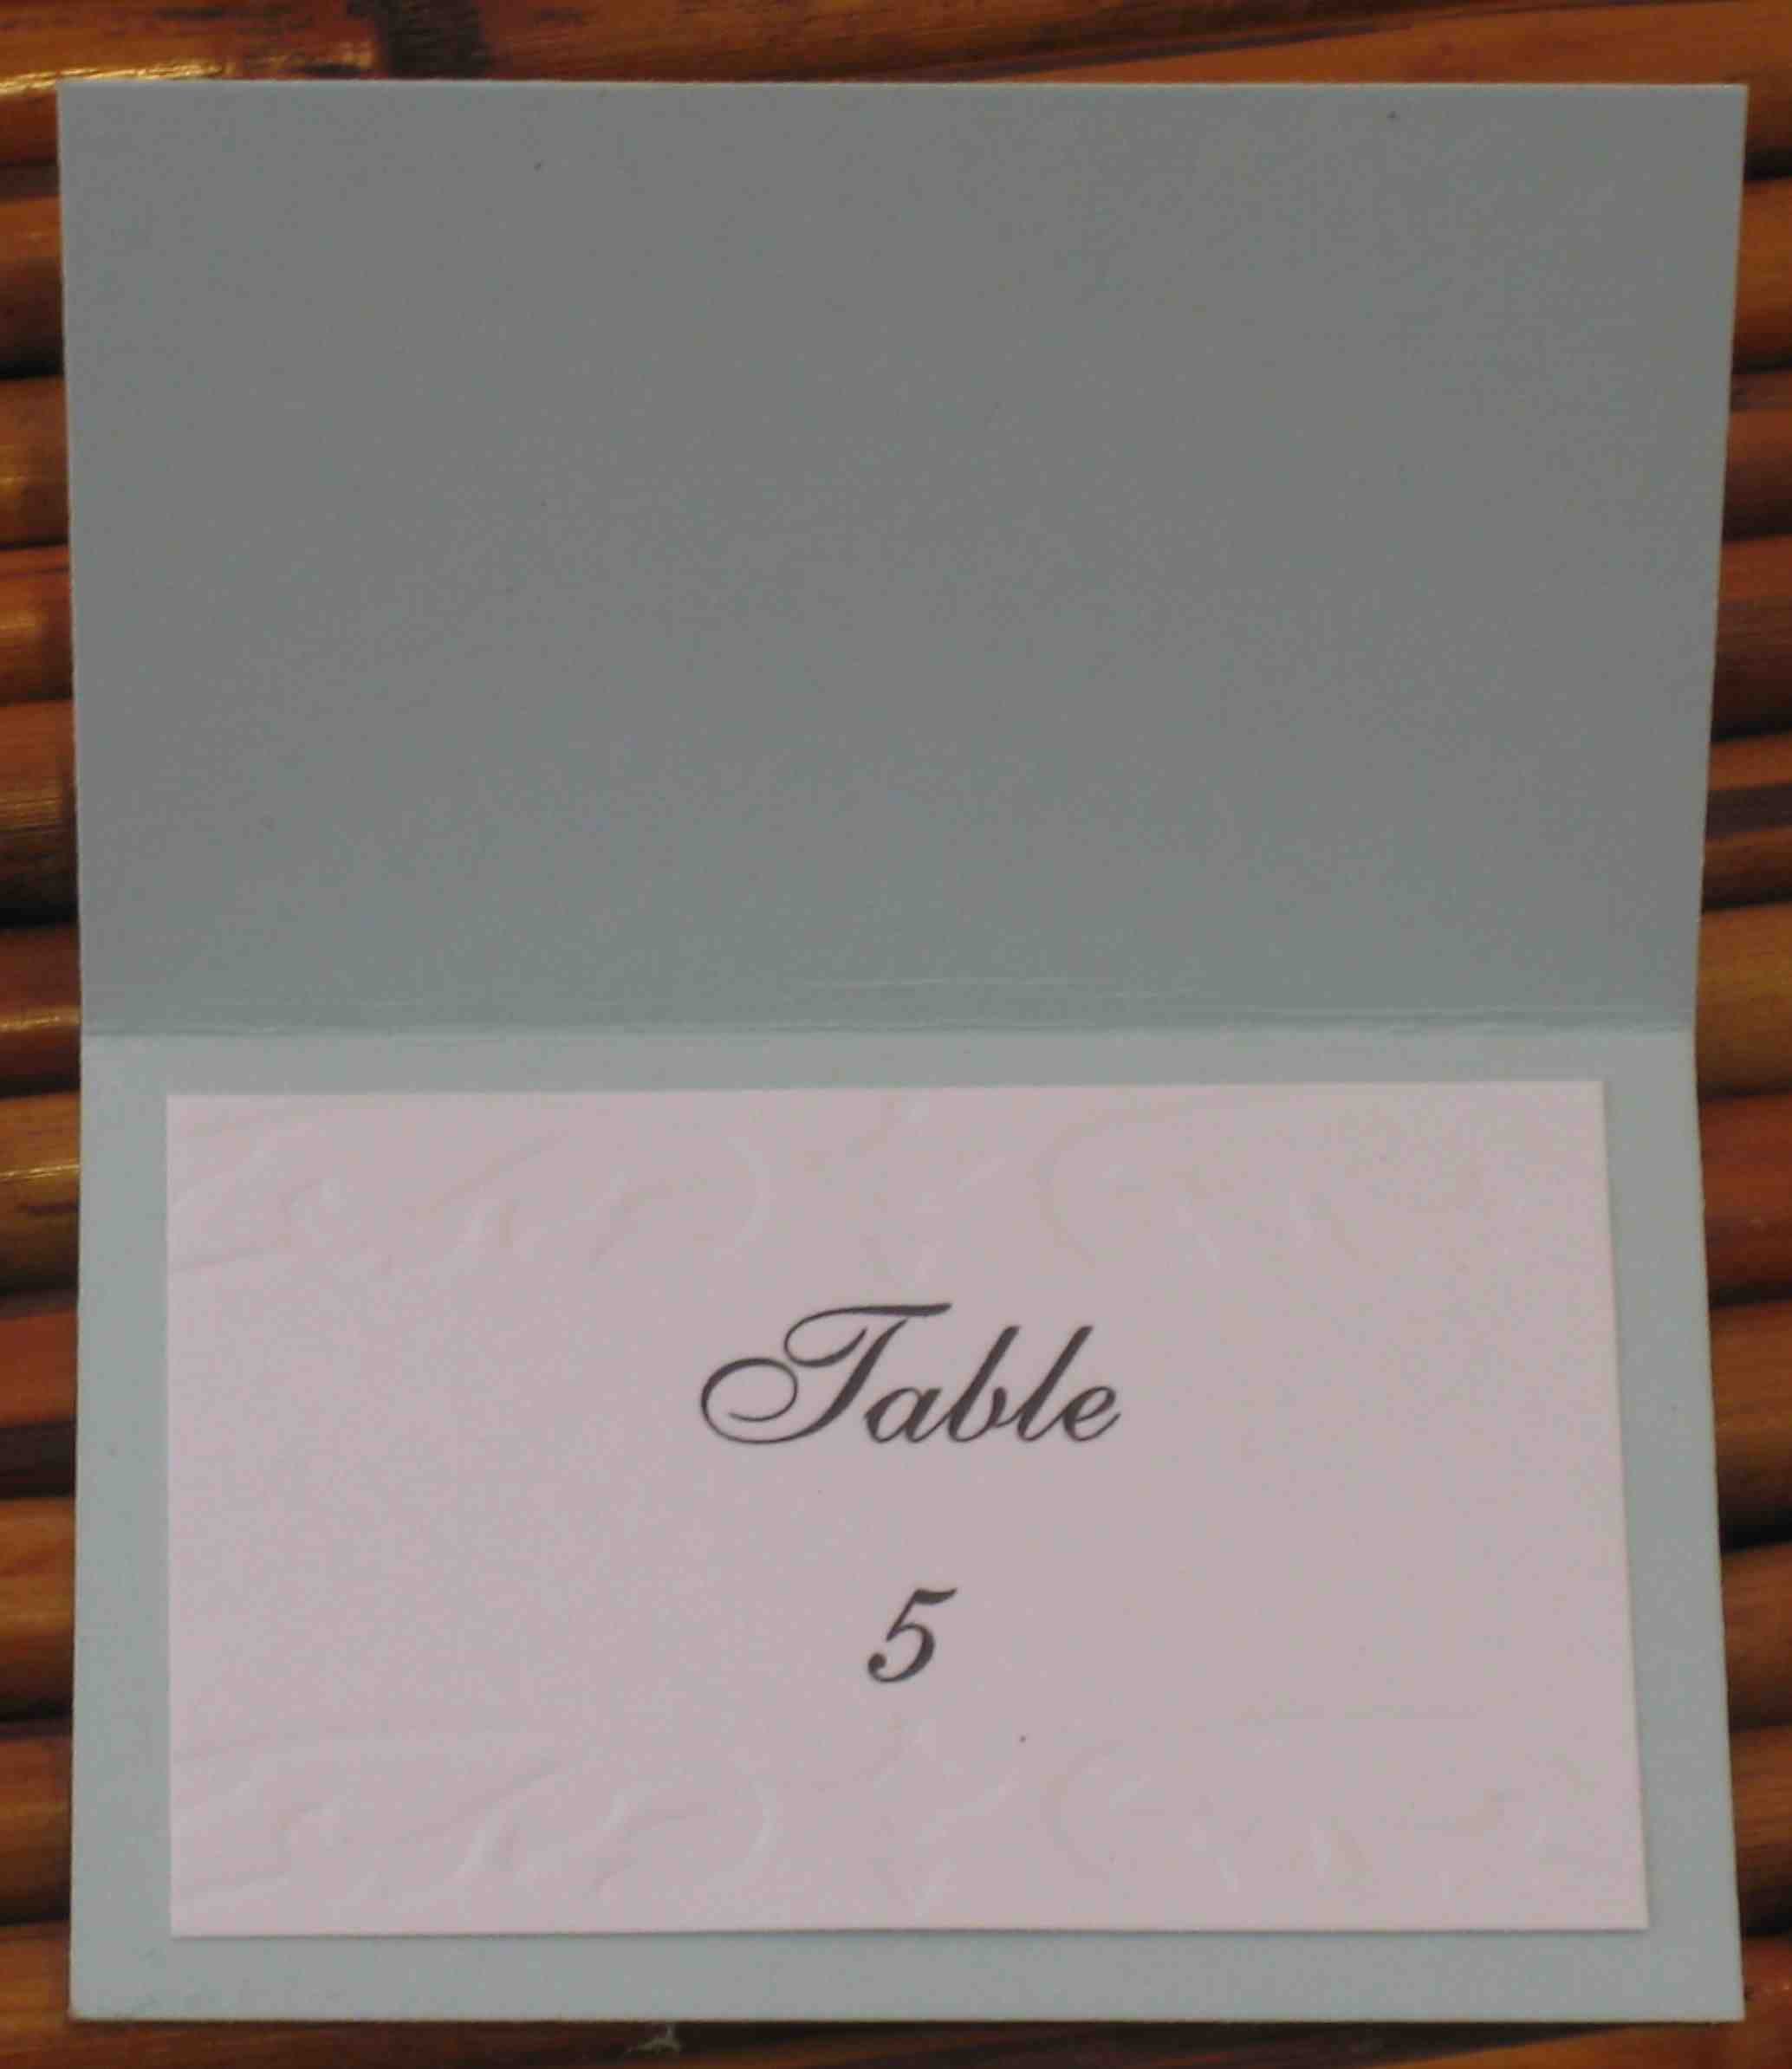 inside place card